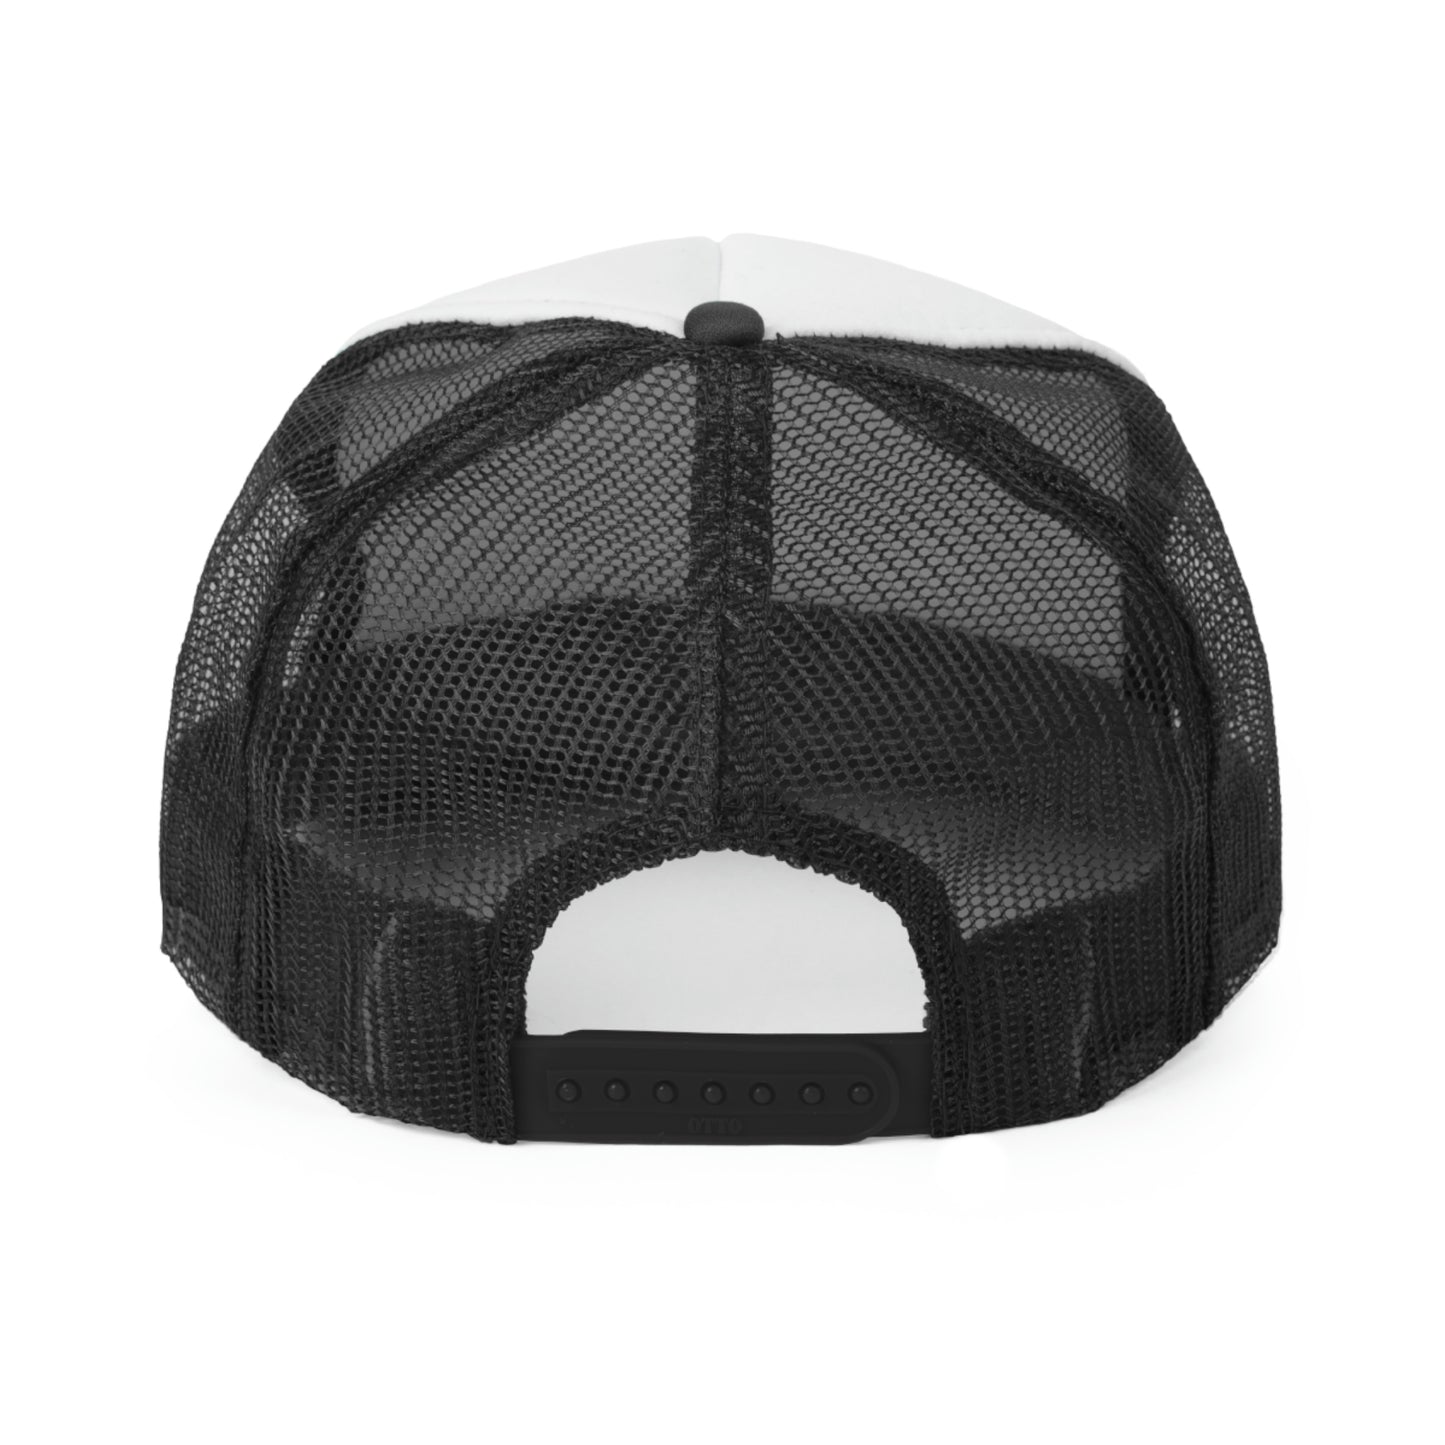 Back view - Vintage-inspired trucker hat in black, featuring a mesh back and snapback closure. Retro design with a curved brim, perfect for a casual and stylish addition to your accessories.